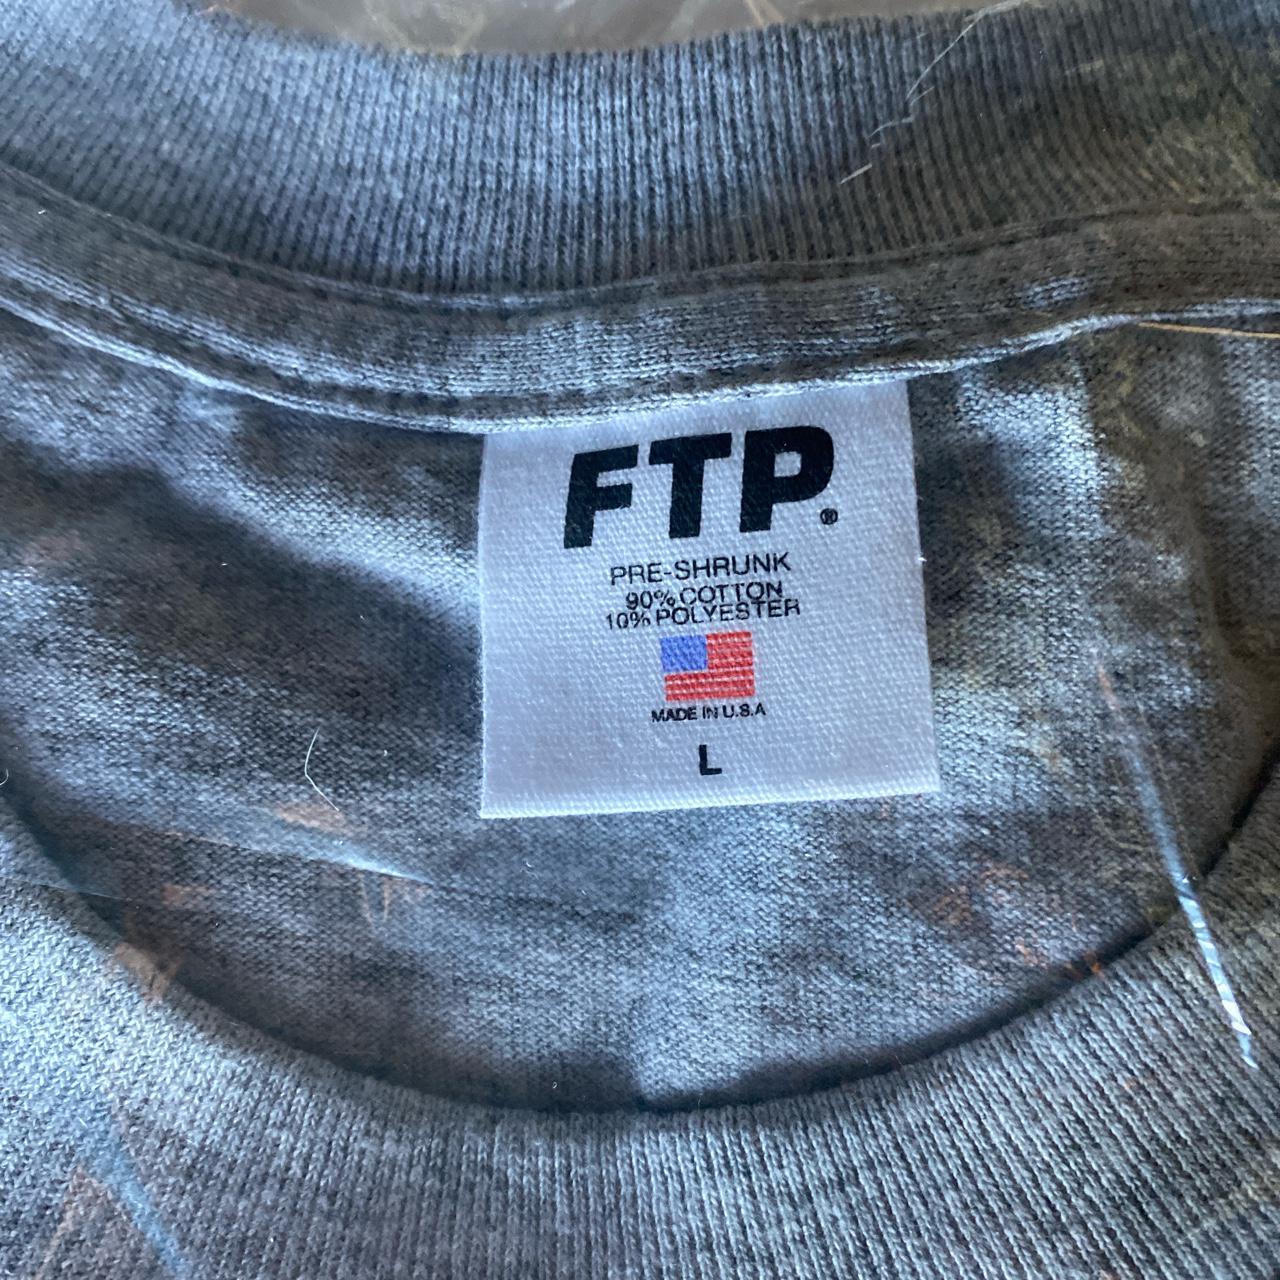 Product Image 3 - #FTP #FUCKTHEPOPULATION

SCRIBBLE LOGO TEE. Size